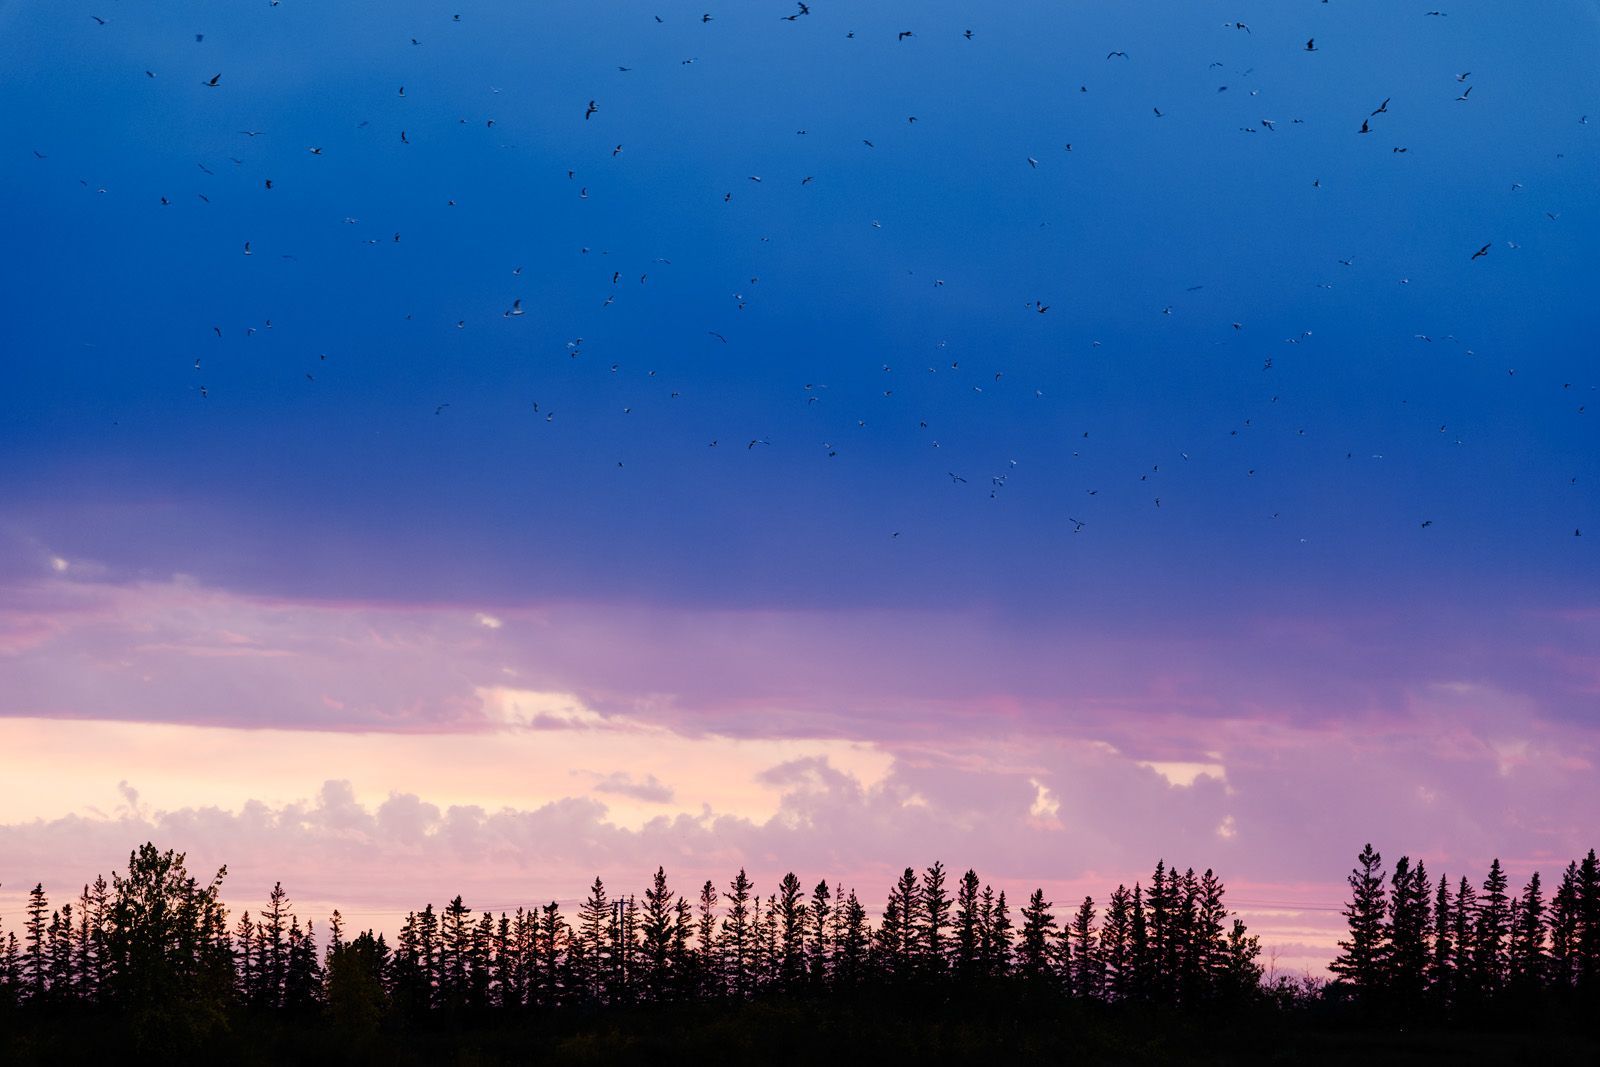 Fall sunset migration event at Fort Whyte Nature Reserve in Winnipeg, Manitoba, Canada.